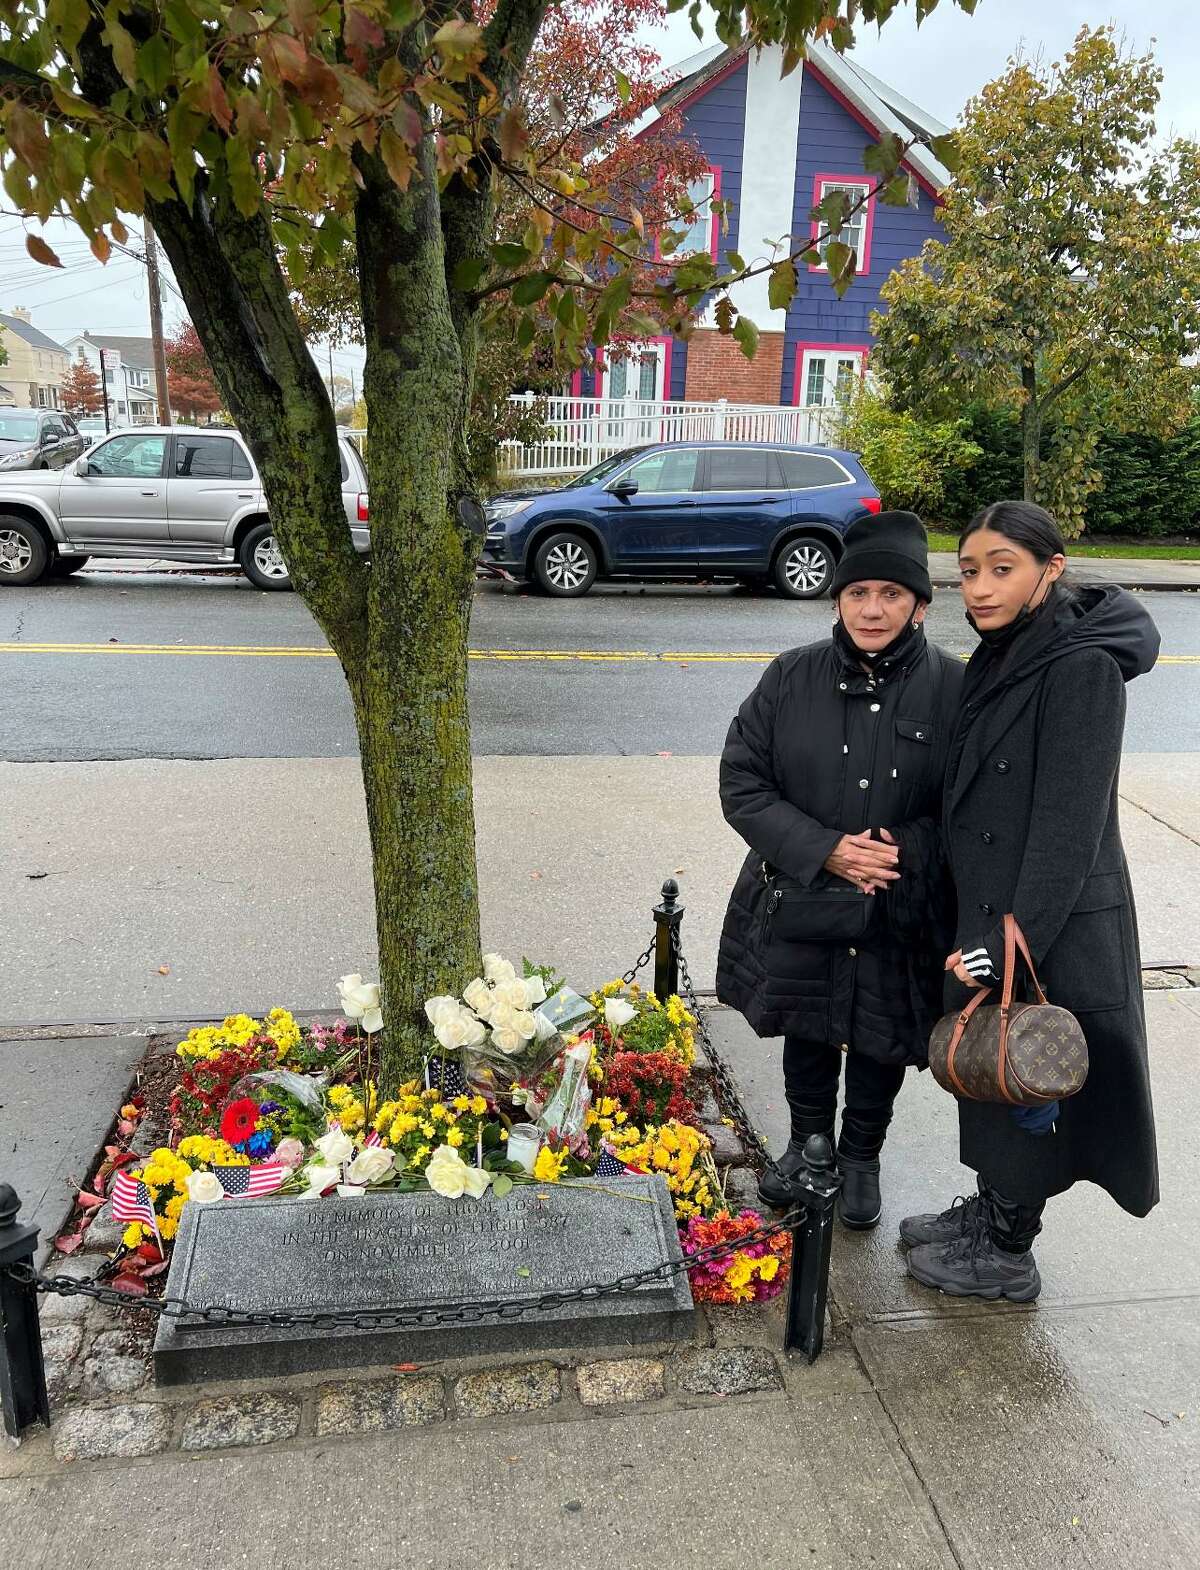 Lorena Made and her mother, Luz Marina Made, stand by a memorial that honors the people who were killed in the crash of American Airlines Flight 587 in 2001 in Queens, N.Y. Maricio Jose Made, Lorena’s father and Luz Marina’s husband, perished in the crash. San Antonio attorney Christopher Pettit obtained a legal settlement for the Mades, but Lorena Made said they never received all of the money they were due.